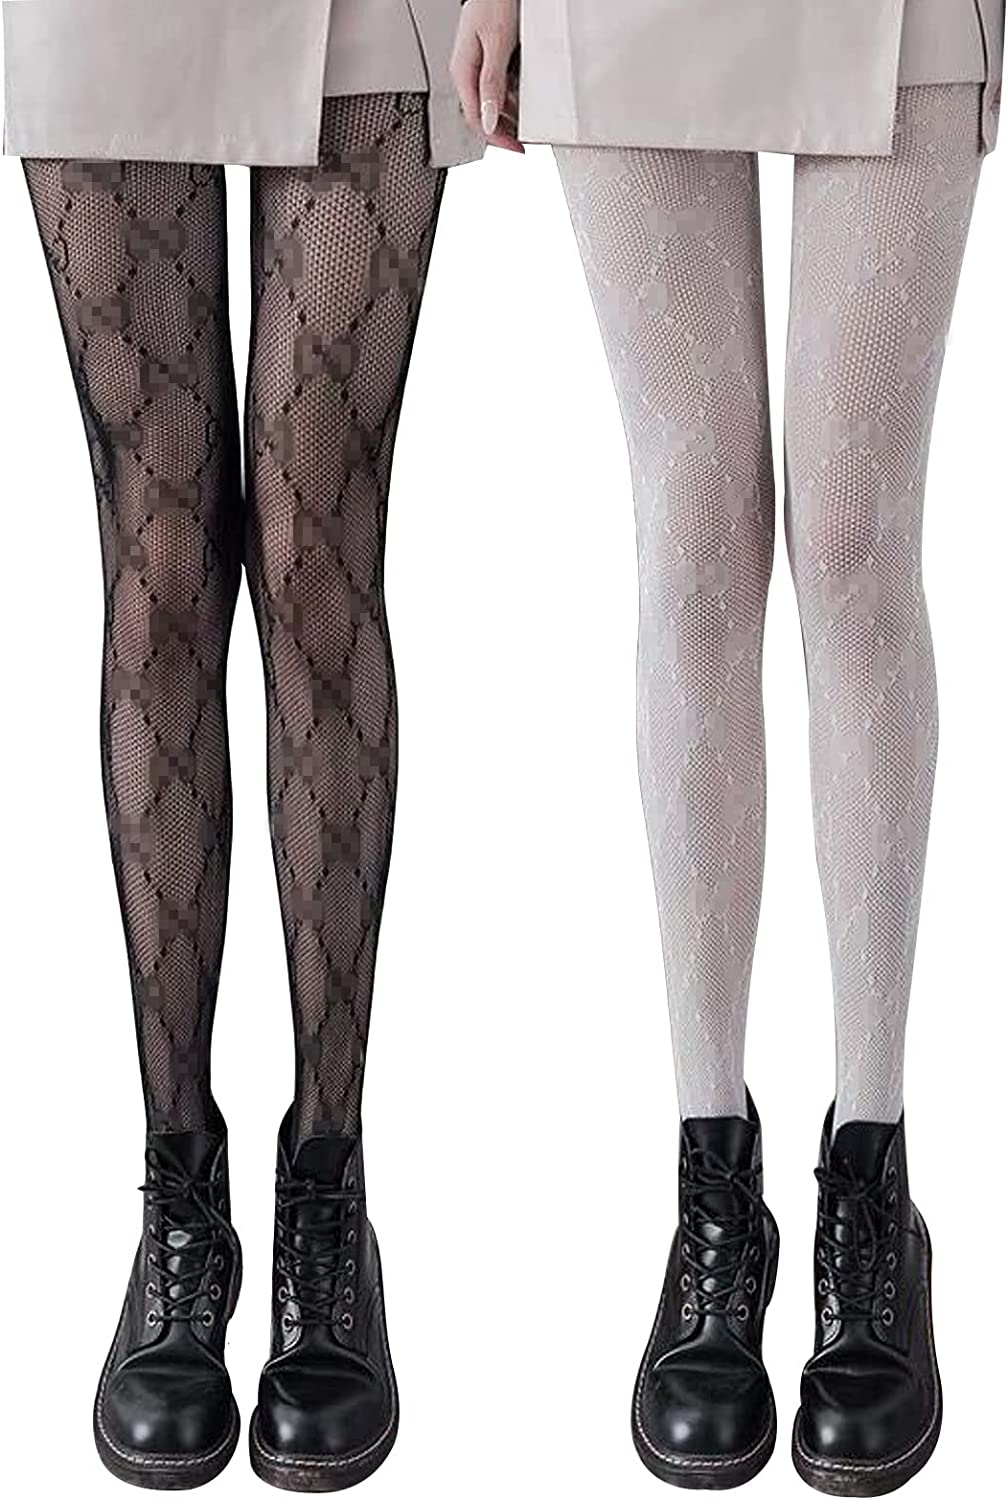 Guwada Sexy Fishnet Stockings Letter Patterned Tights for Women Fashion  Lace Tights High Waist Pantyhose Stockings Leggings at  Women's  Clothing store